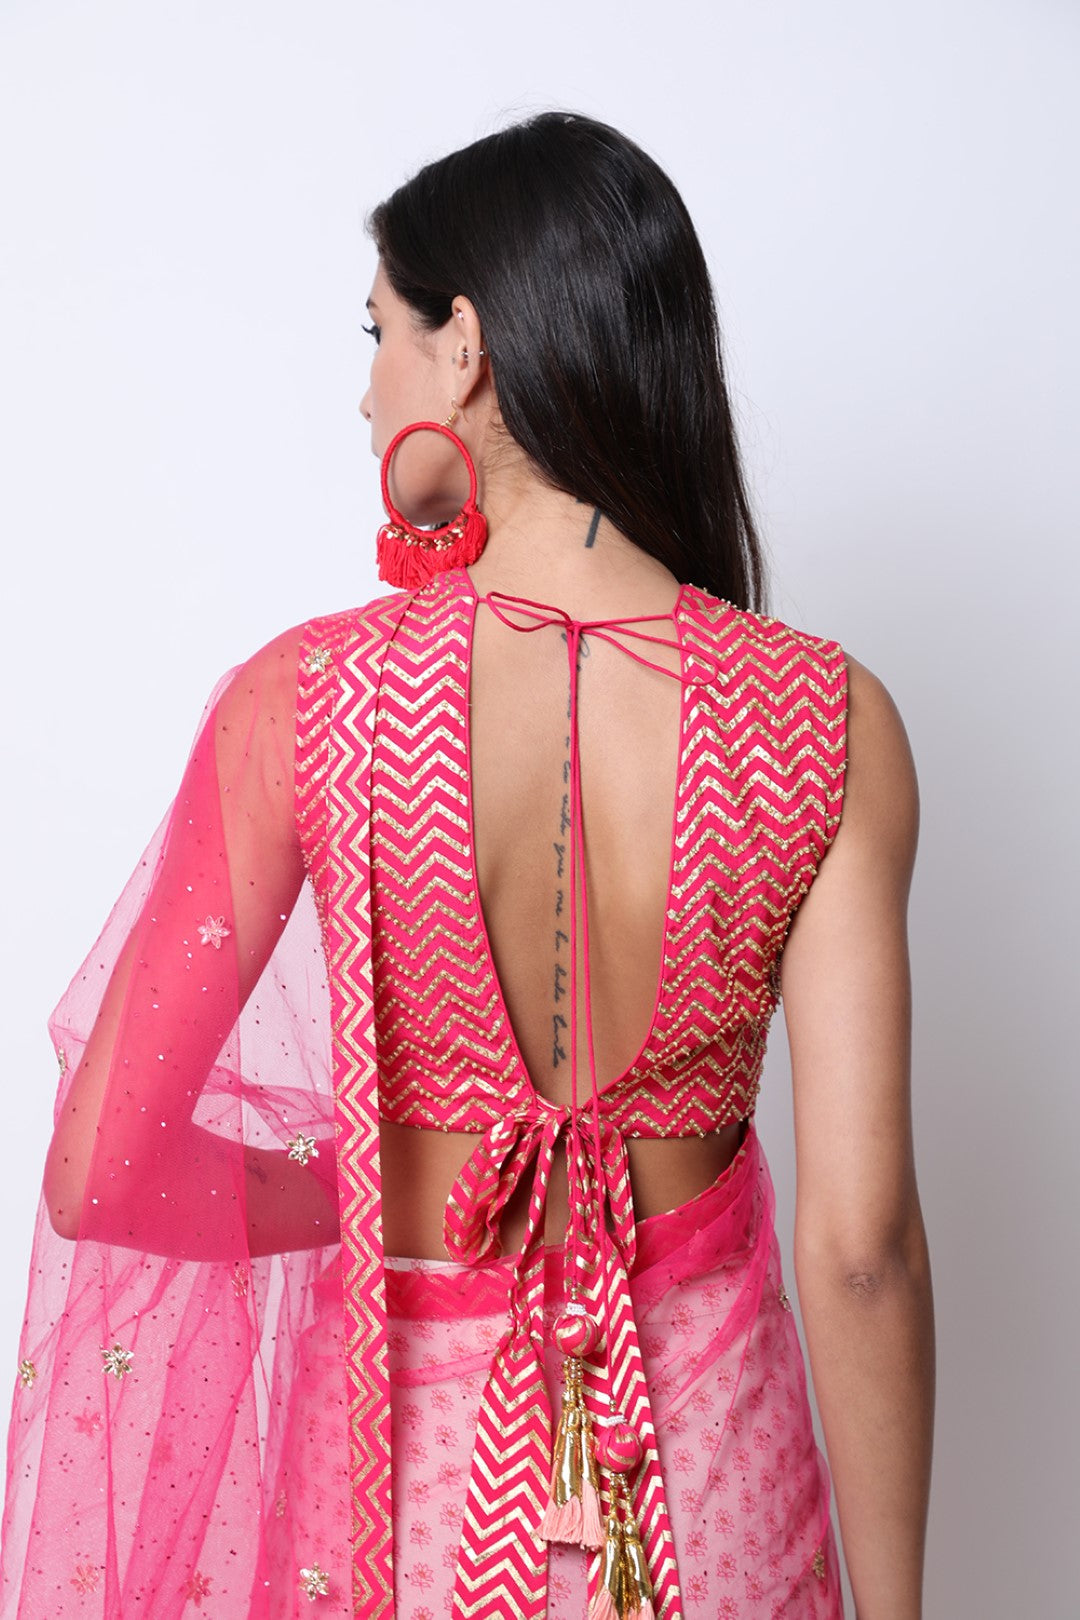 Rani Pink blouse with ghee print double layer godets skirt with attached embroidered palla.